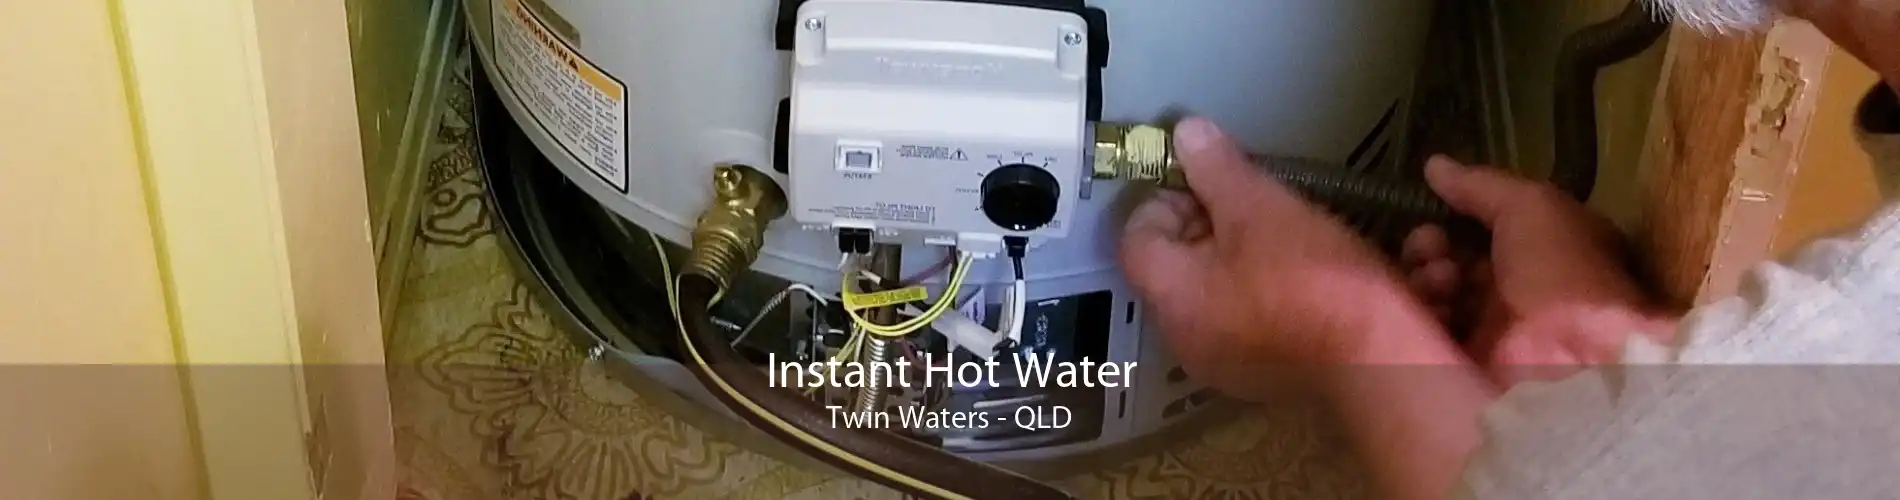 Instant Hot Water Twin Waters - QLD